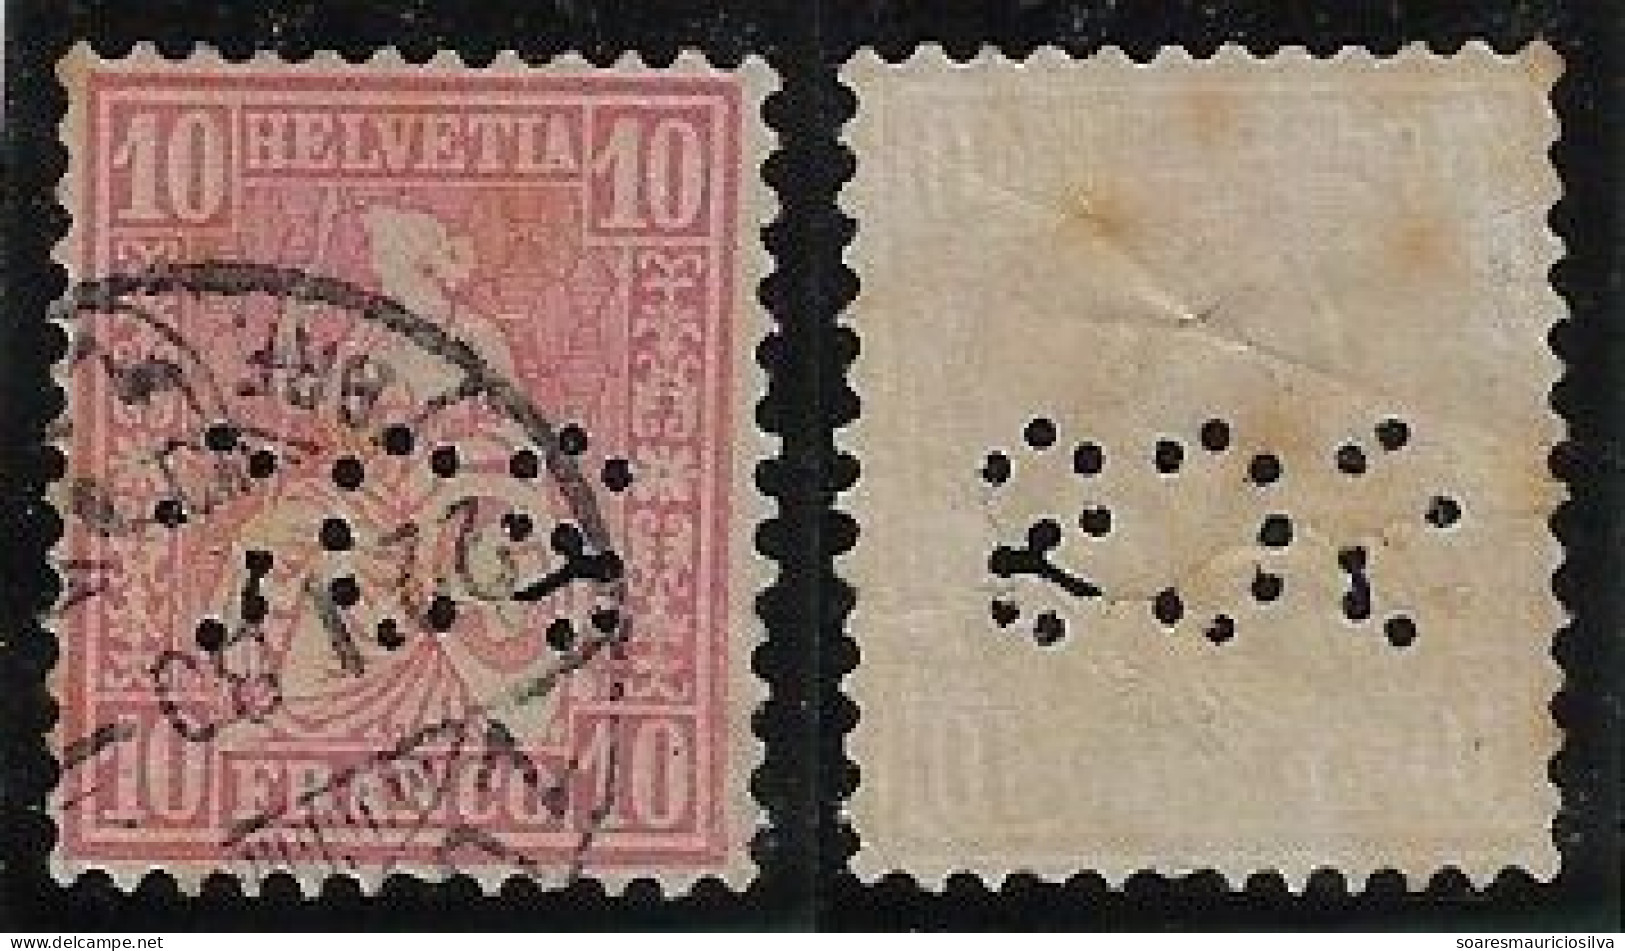 Switzerland 1874/1893 Stamp Perfin SCS By Société Crédit Suisse Swiss Credit Company From Zuriche Lochung Perfore - Perforadas